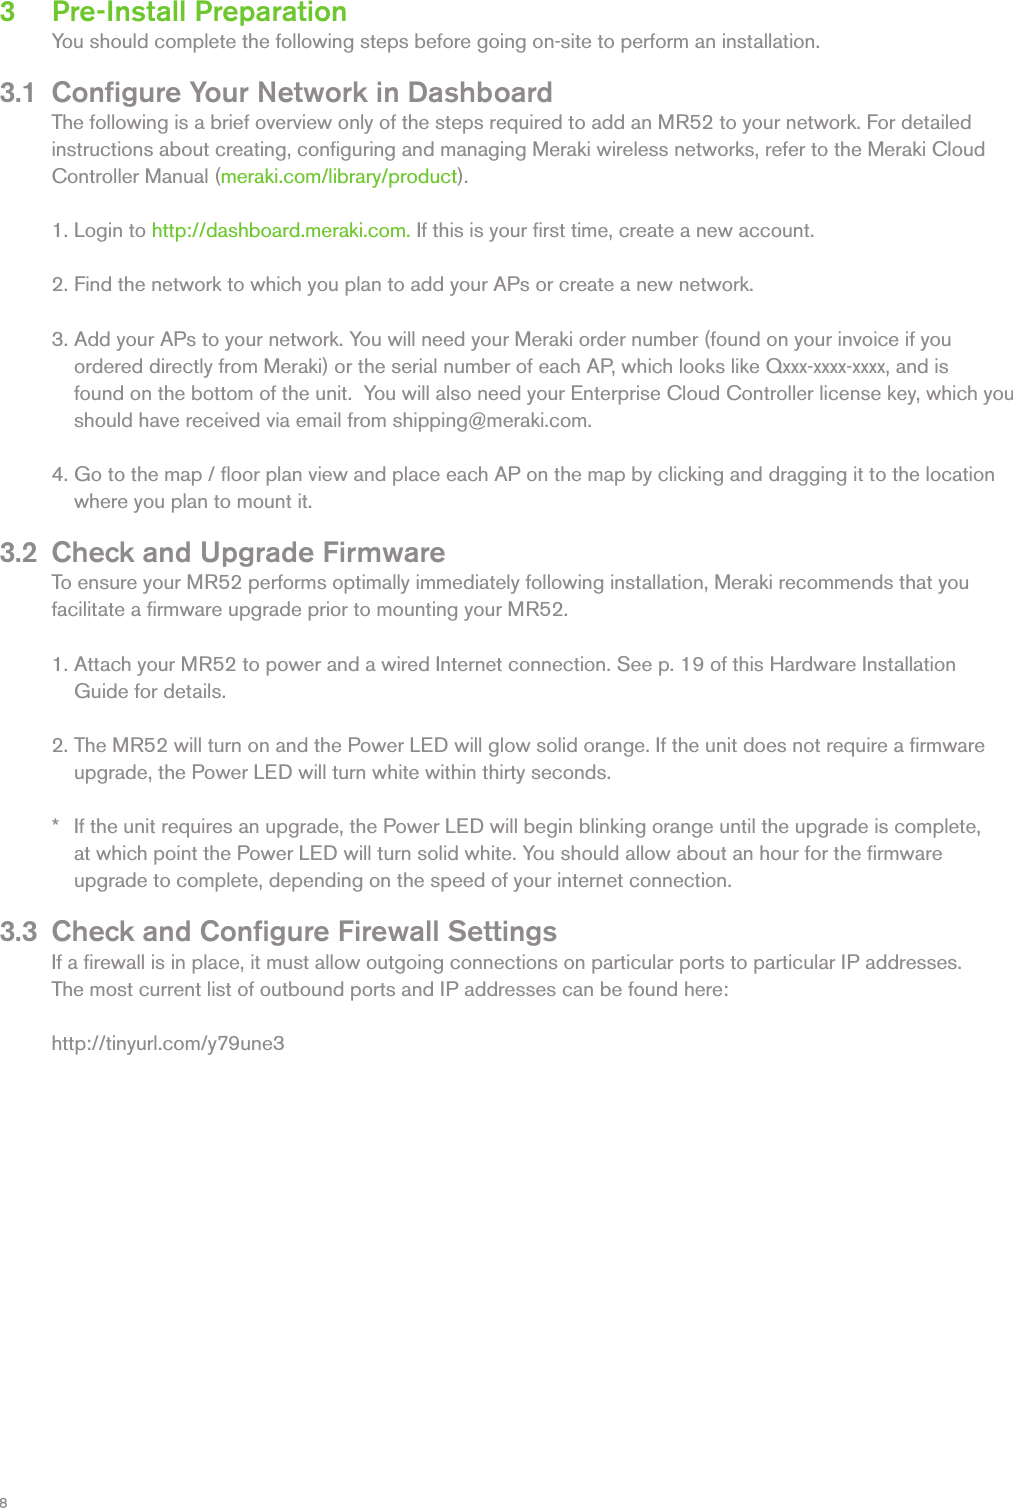 83   Pre-Install Preparation  You should complete the following steps before going on-site to perform an installation. 3.1  Conﬁgure Your Network in Dashboard  The following is a brief overview only of the steps required to add an MR52 to your network. For detailed   instructions about creating, conﬁguring and managing Meraki wireless networks, refer to the Meraki Cloud   Controller Manual (meraki.com/library/product).   1. Login to http://dashboard.meraki.com. If this is your ﬁrst time, create a new account.   2. Find the network to which you plan to add your APs or create a new network.    3. Add your APs to your network. You will need your Meraki order number (found on your invoice if you      ordered directly from Meraki) or the serial number of each AP, which looks like Qxxx-xxxx-xxxx, and is      found on the bottom of the unit.  You will also need your Enterprise Cloud Controller license key, which you        should have received via email from shipping@meraki.com.   4. Go to the map / ﬂoor plan view and place each AP on the map by clicking and dragging it to the location        where you plan to mount it. 3.2  Check and Upgrade Firmware  To ensure your MR52 performs optimally immediately following installation, Meraki recommends that you   facilitate a ﬁrmware upgrade prior to mounting your MR52.   1. Attach your MR52 to power and a wired Internet connection. See p. 19 of this Hardware Installation     Guide for details.    2. The MR52 will turn on and the Power LED will glow solid orange. If the unit does not require a ﬁrmware     upgrade, the Power LED will turn white within thirty seconds.     *   If the unit requires an upgrade, the Power LED will begin blinking orange until the upgrade is complete,      at which point the Power LED will turn solid white. You should allow about an hour for the ﬁrmware      upgrade to complete, depending on the speed of your internet connection. 3.3  Check and Conﬁgure Firewall Settings  If a ﬁrewall is in place, it must allow outgoing connections on particular ports to particular IP addresses.     The most current list of outbound ports and IP addresses can be found here:  http://tinyurl.com/y79une3 